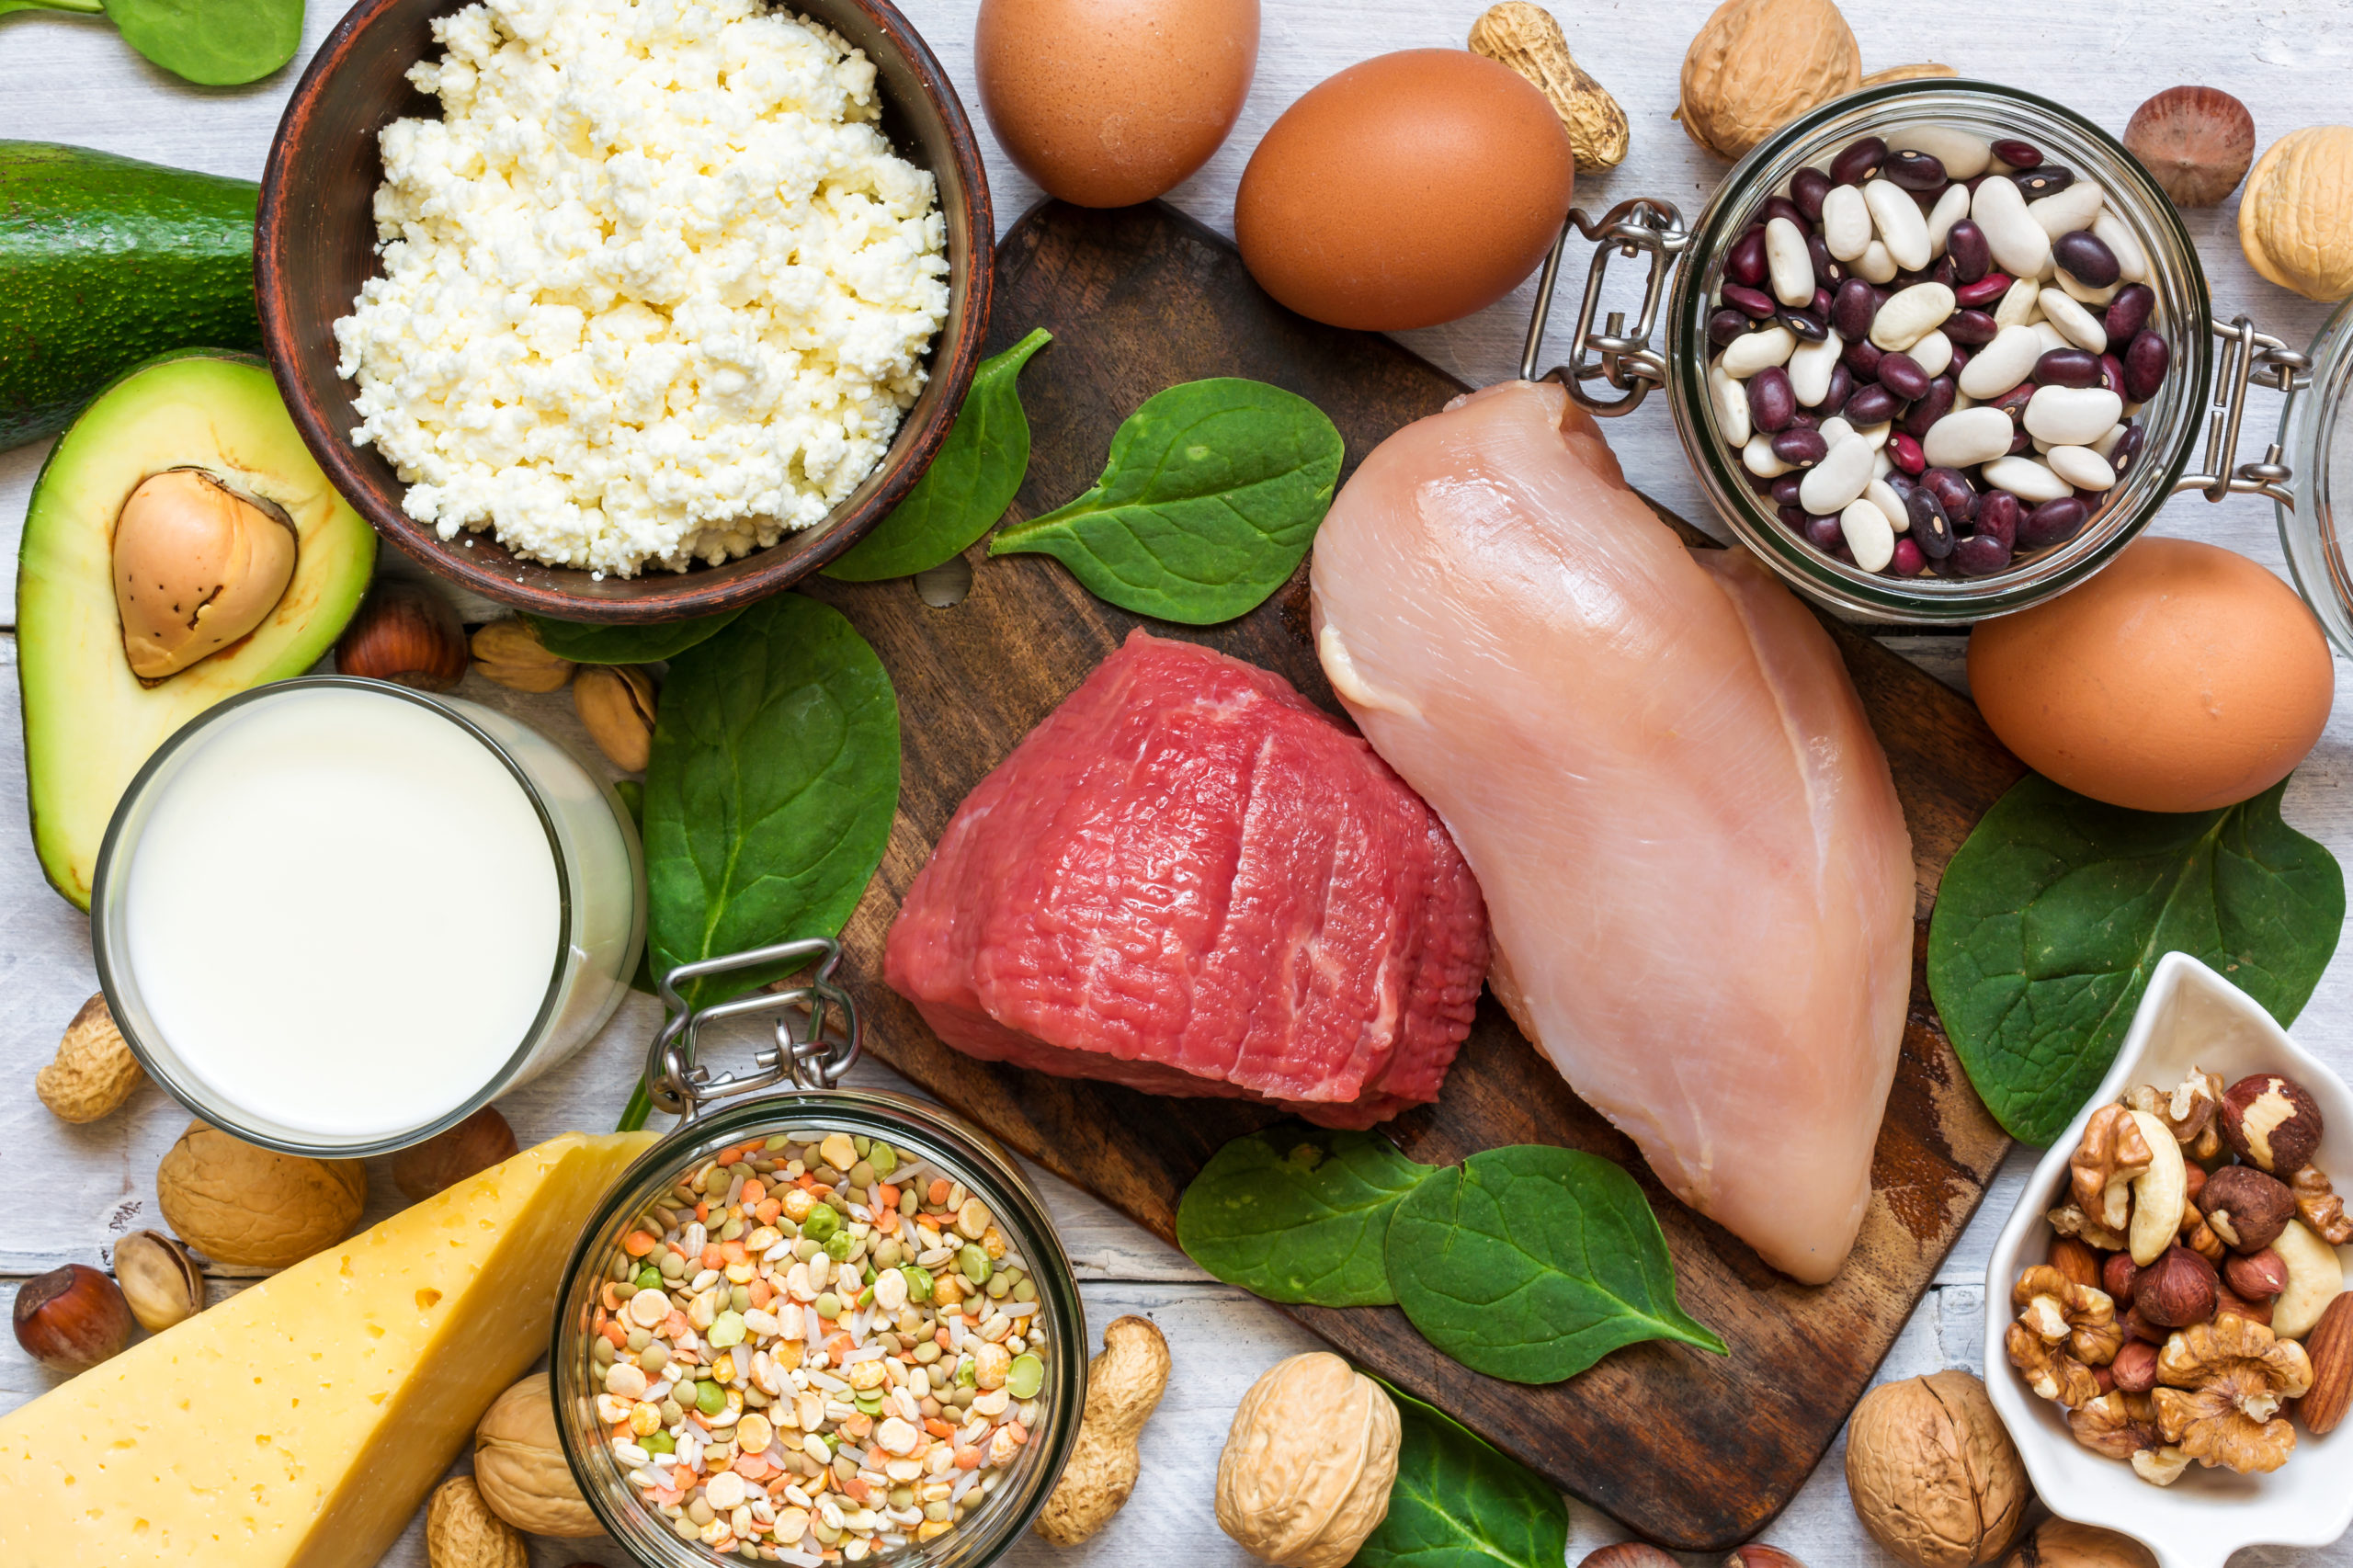 A spread of high-protein foods, including cheese, milk, chicken, lentils, nuts.